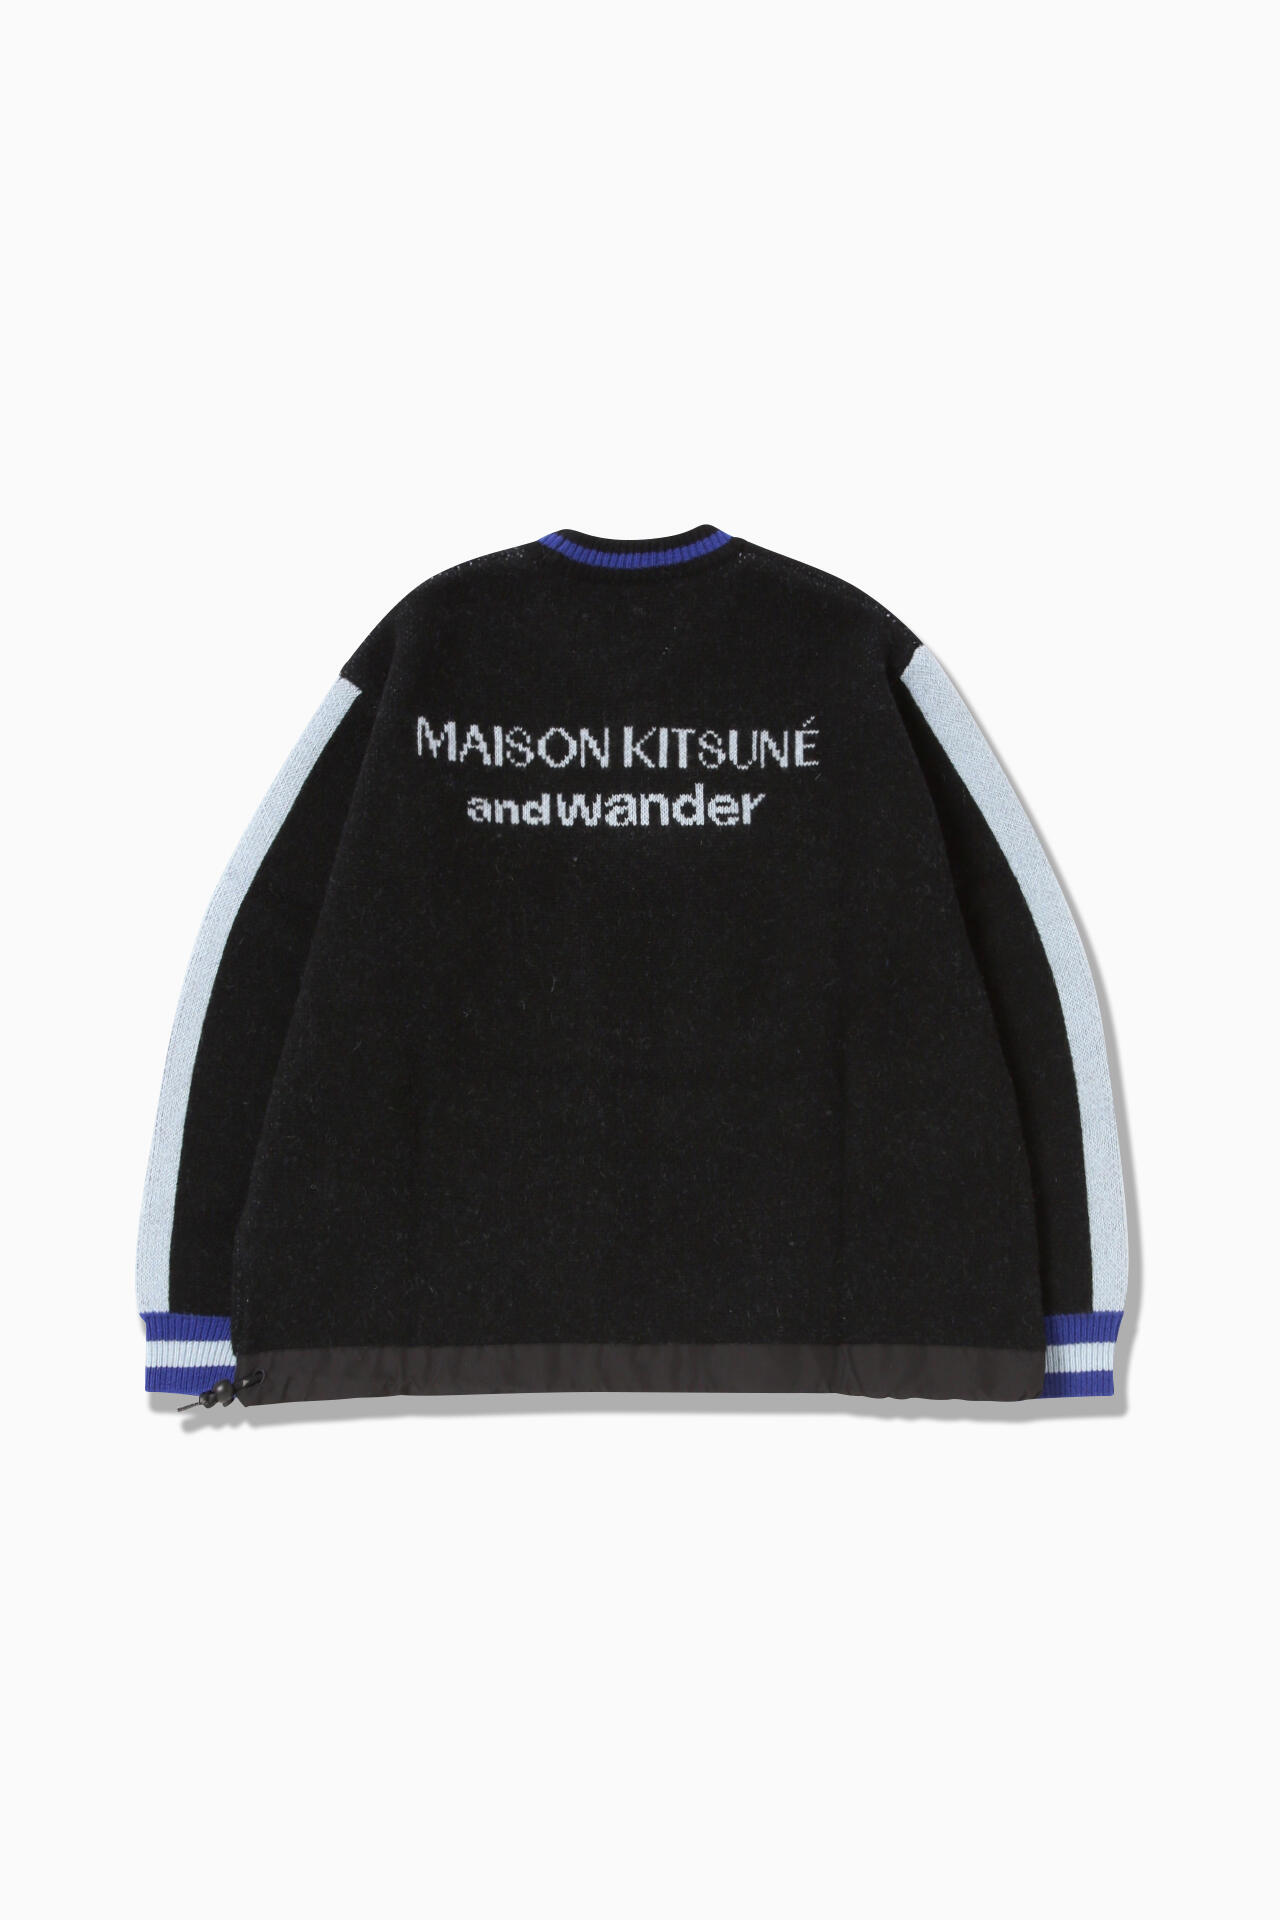 MAISON KITSUNÉ × and wander knit pullover | cut_knit | and wander ...